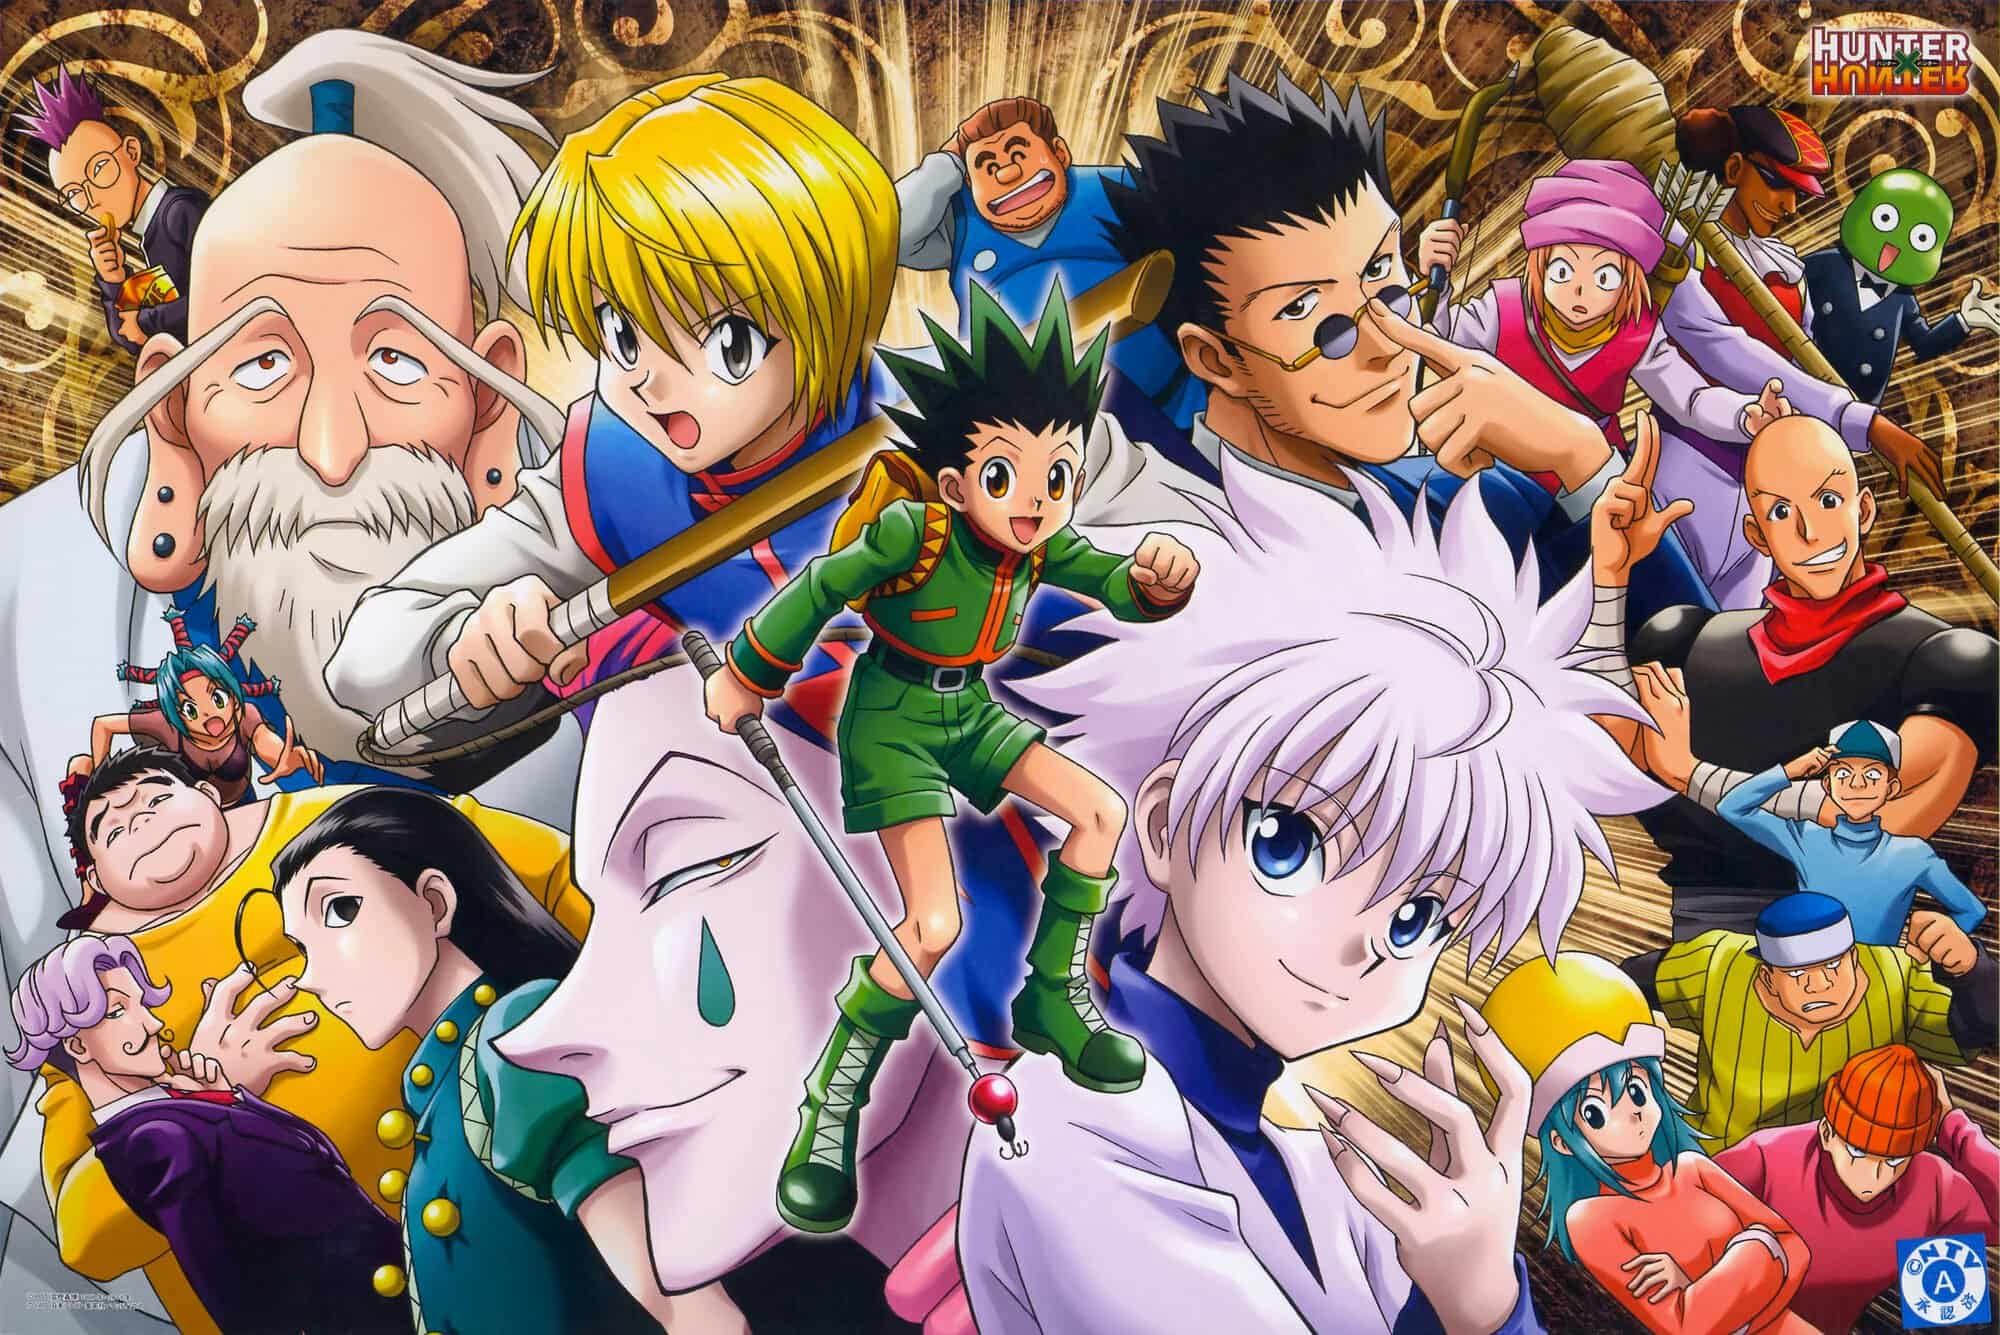 Artistic Excellence of Hunter x Hunter